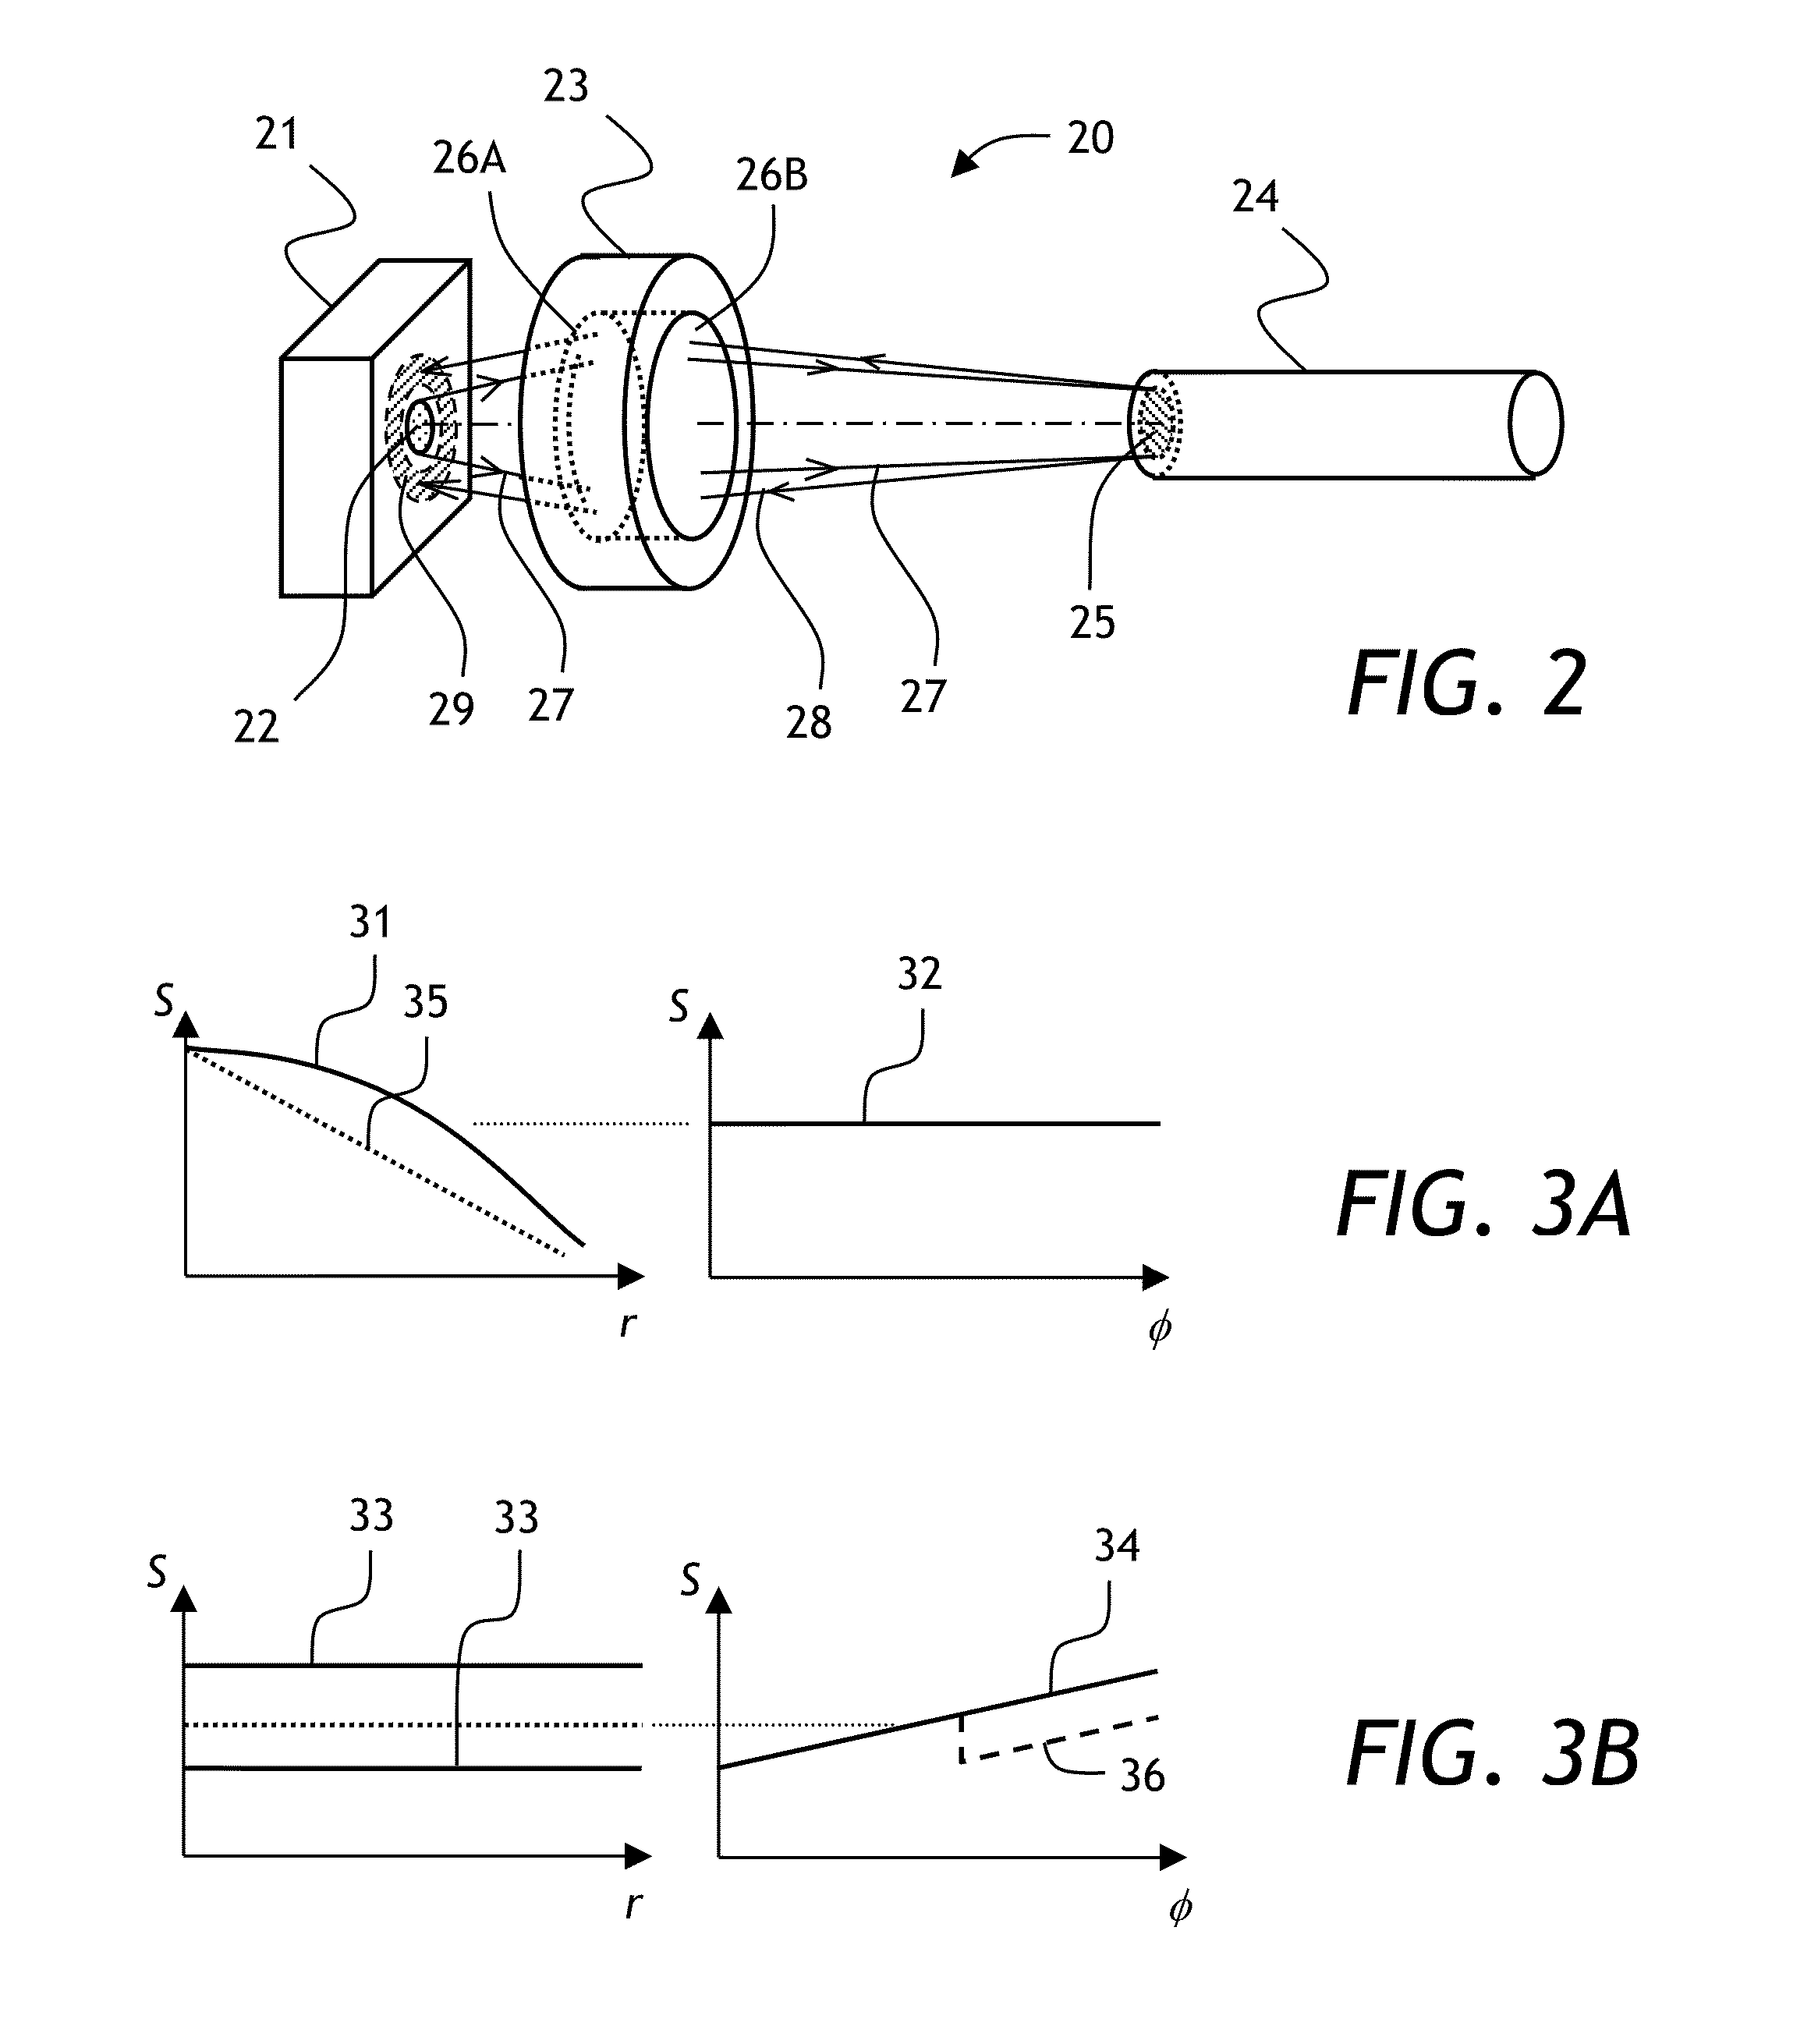 Optical subassembly for coupling light into an optical waveguide